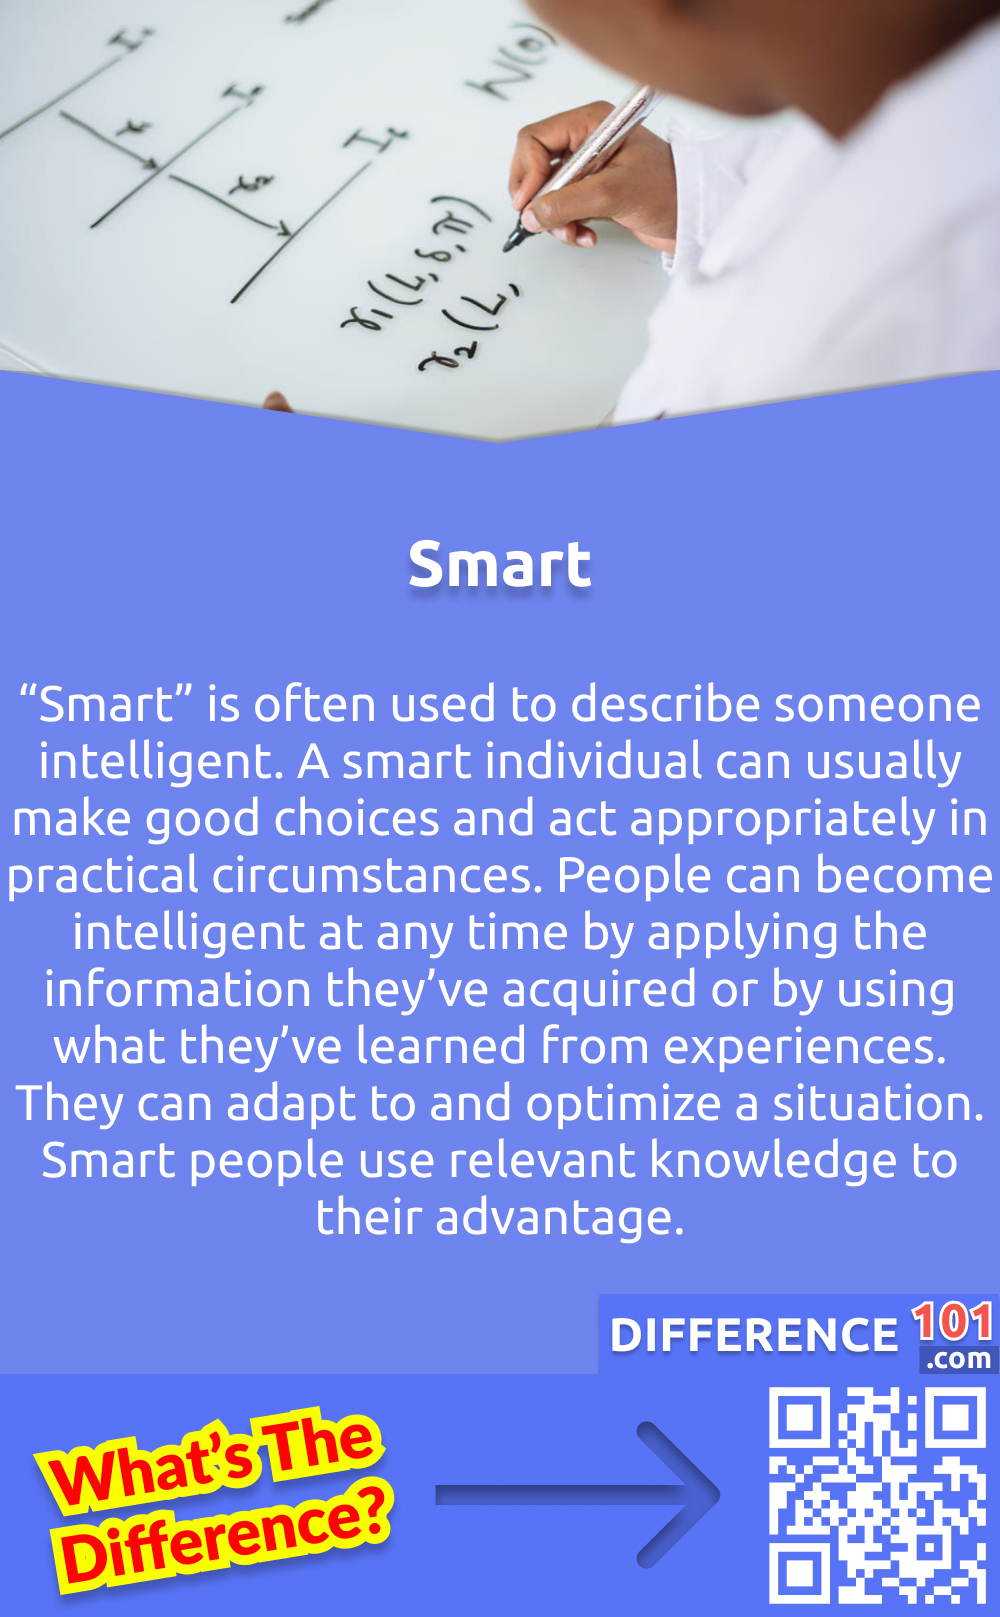 What Does Smart Mean? “Smart” is often used to describe someone intelligent. A smart individual can usually make good choices and act appropriately in practical circumstances. People can become intelligent at any time by applying the information they’ve acquired or by using what they’ve learned from experiences. They can adapt to and optimize a situation. Smart people use relevant knowledge to their advantage.